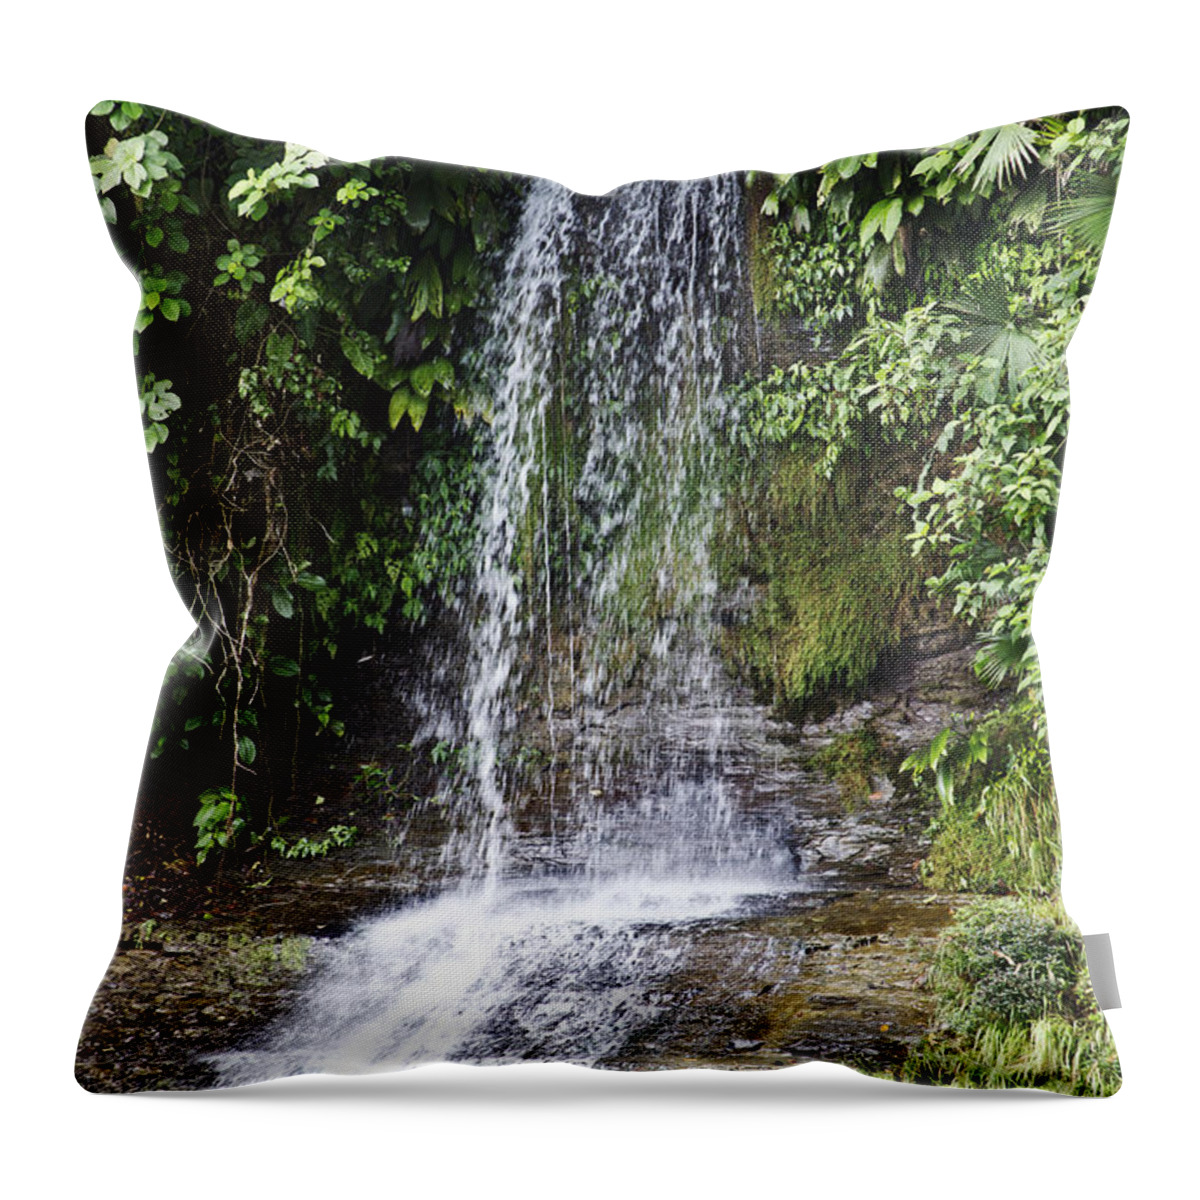 Waterfalls Throw Pillow featuring the photograph Cascada Pequena by Kathy McClure